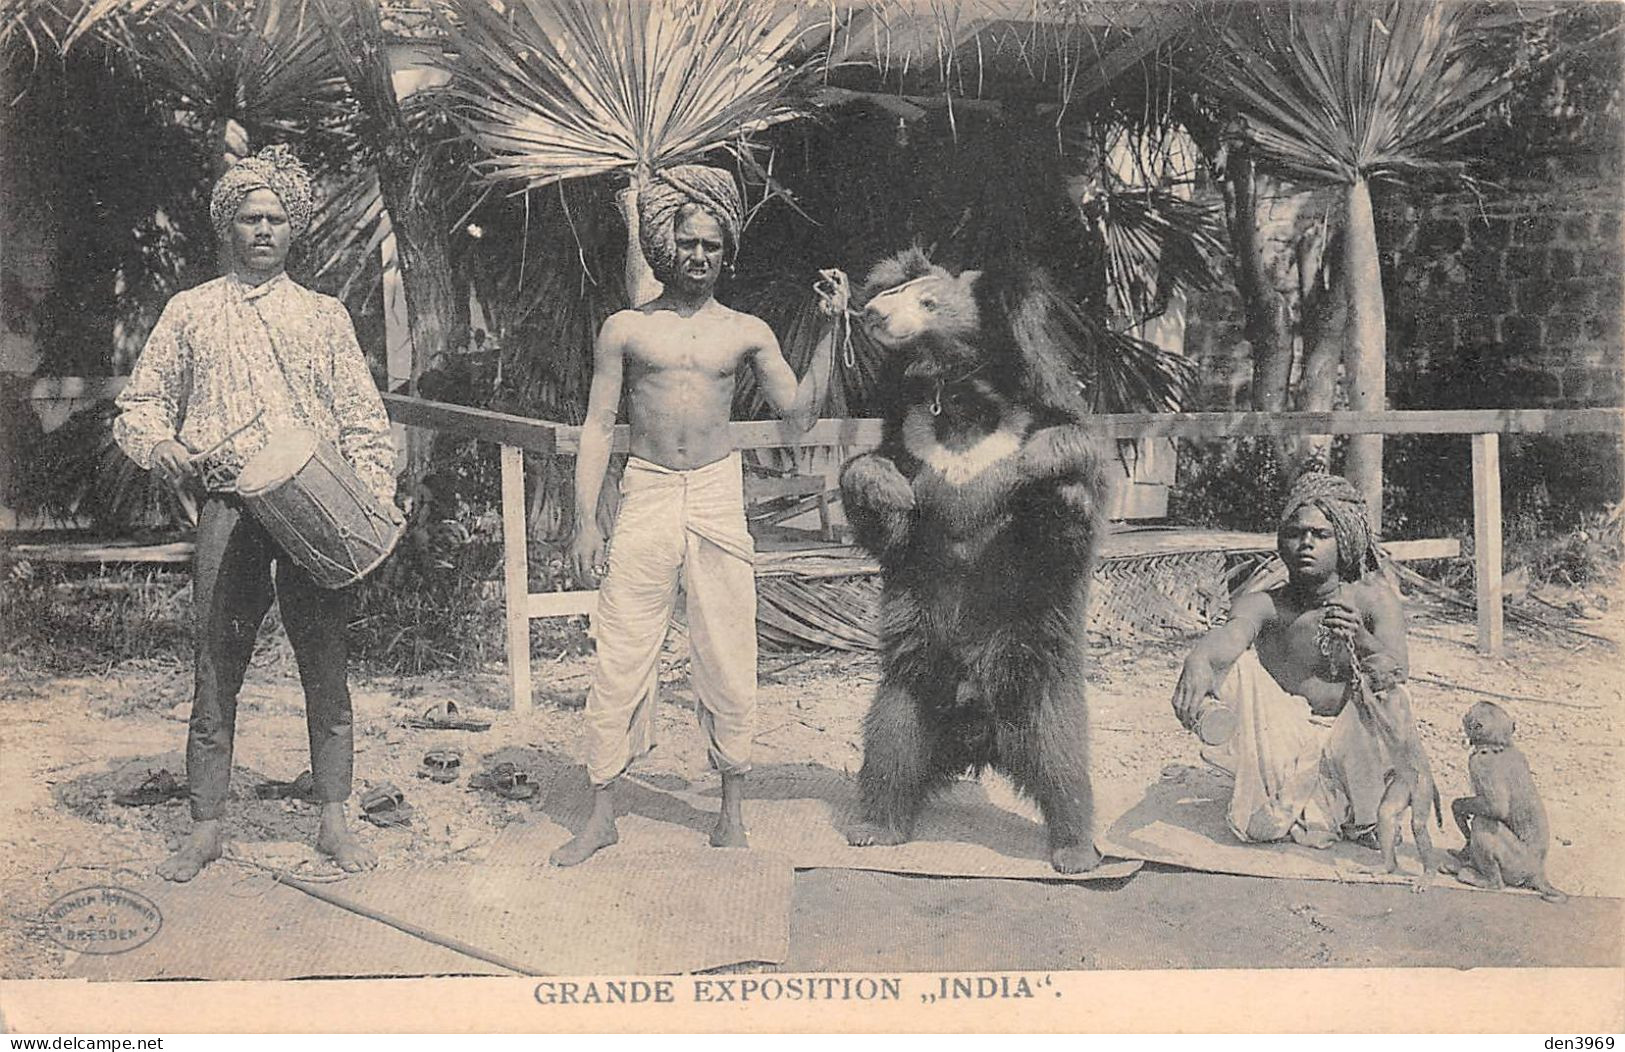 Inde - Grande Exposition INDIA - Montreur D'Ours, Tambourinaire - Indien